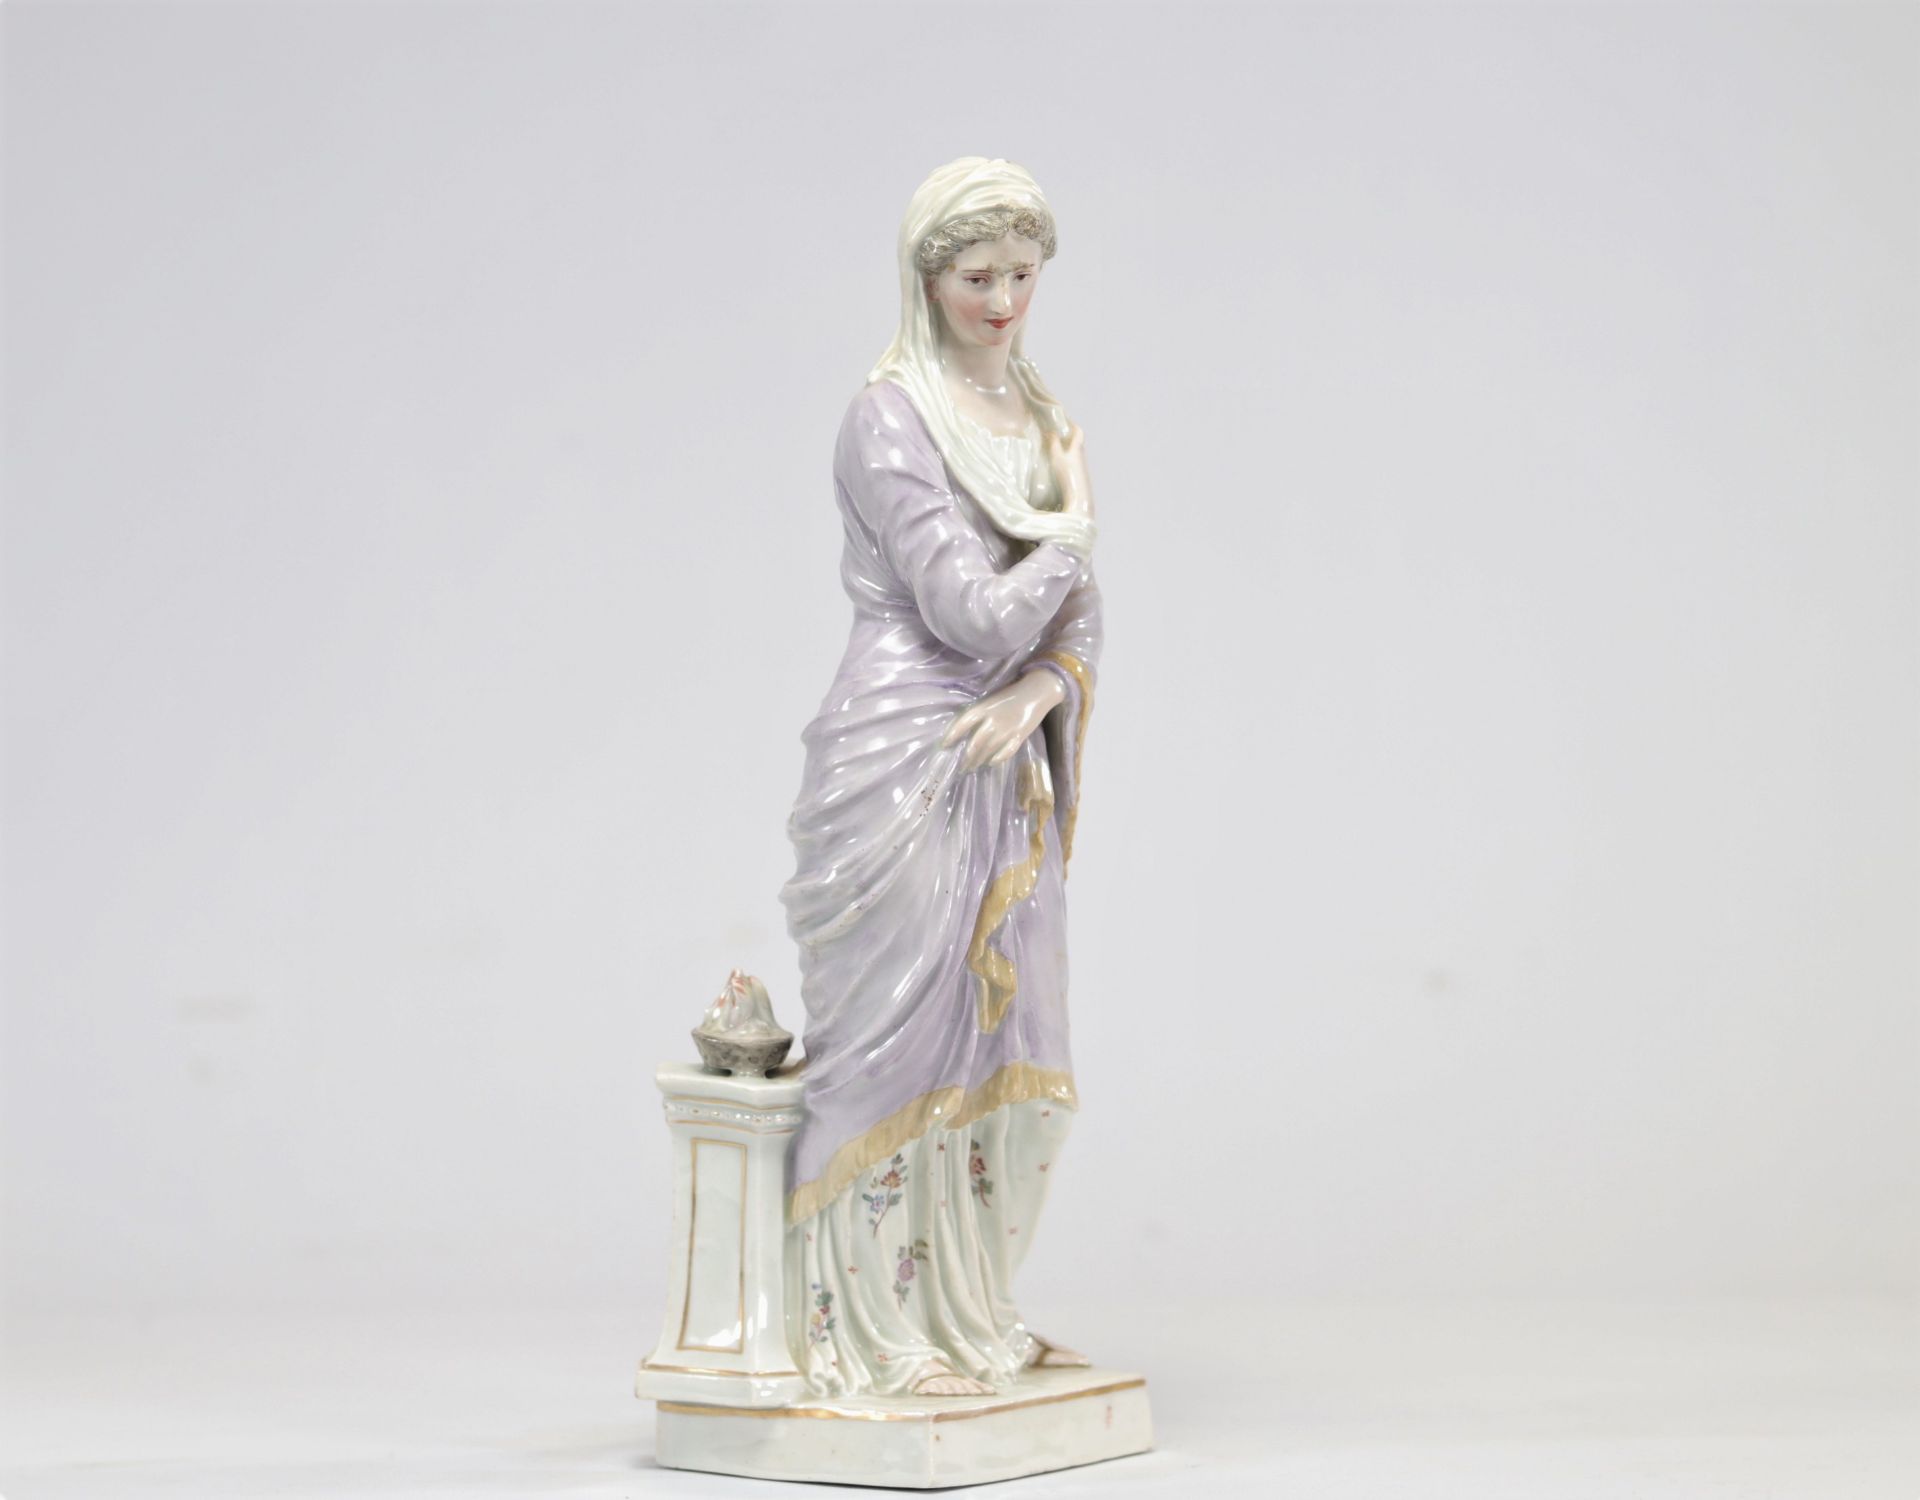 Young woman made in porcelain probably from the 18th century - Image 2 of 7